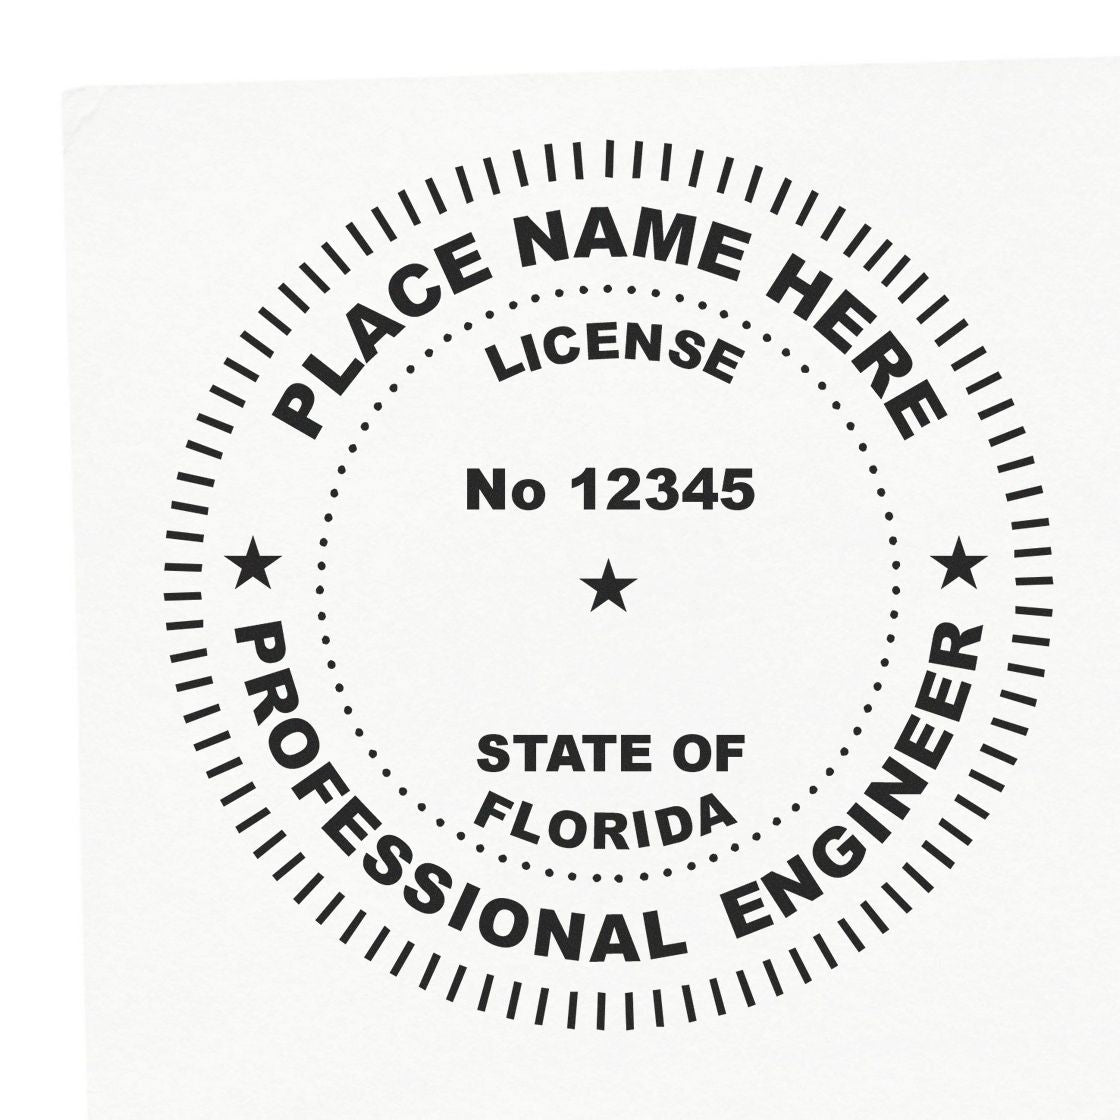 This paper is stamped with a sample imprint of the Florida Professional Engineer Seal Stamp, signifying its quality and reliability.